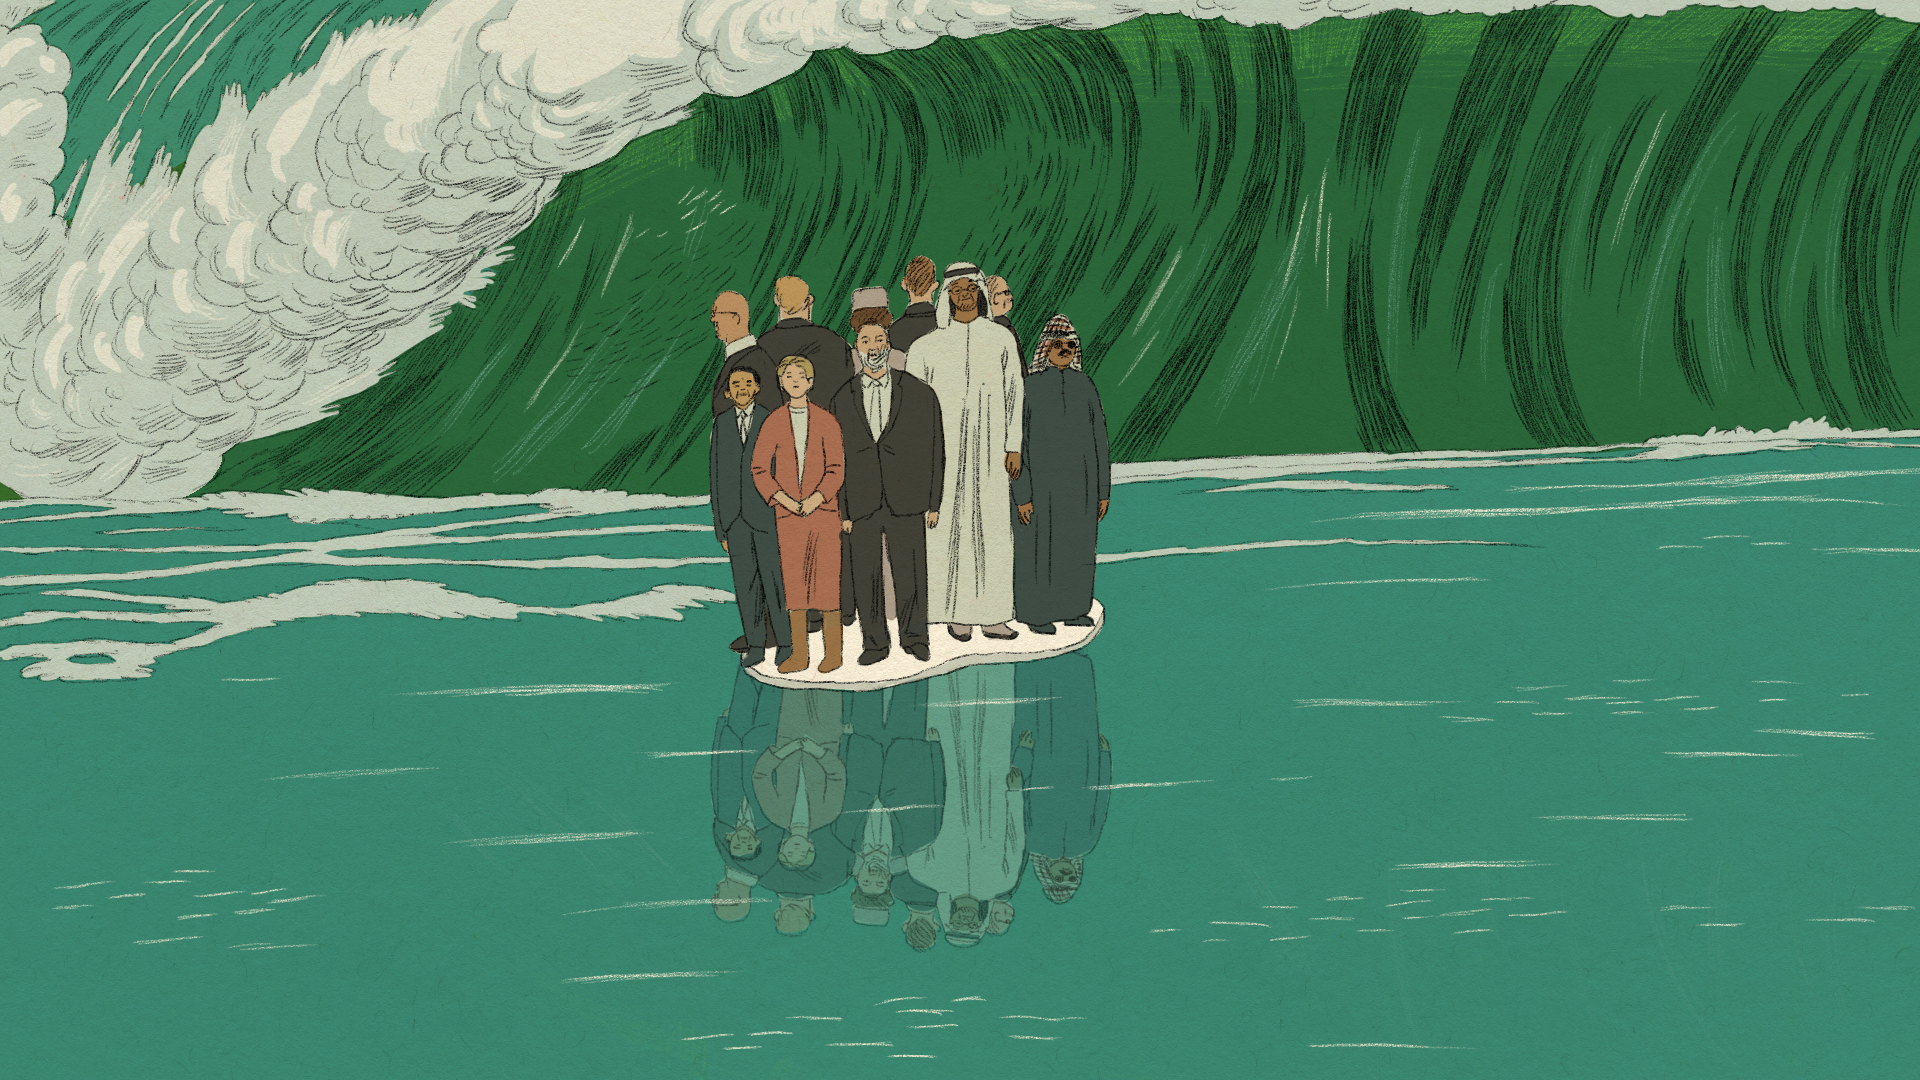 An illustration shows world leaders crowded on a floating sheet of ice surrounded by water. Behind them, a giant wave quickly approaches.